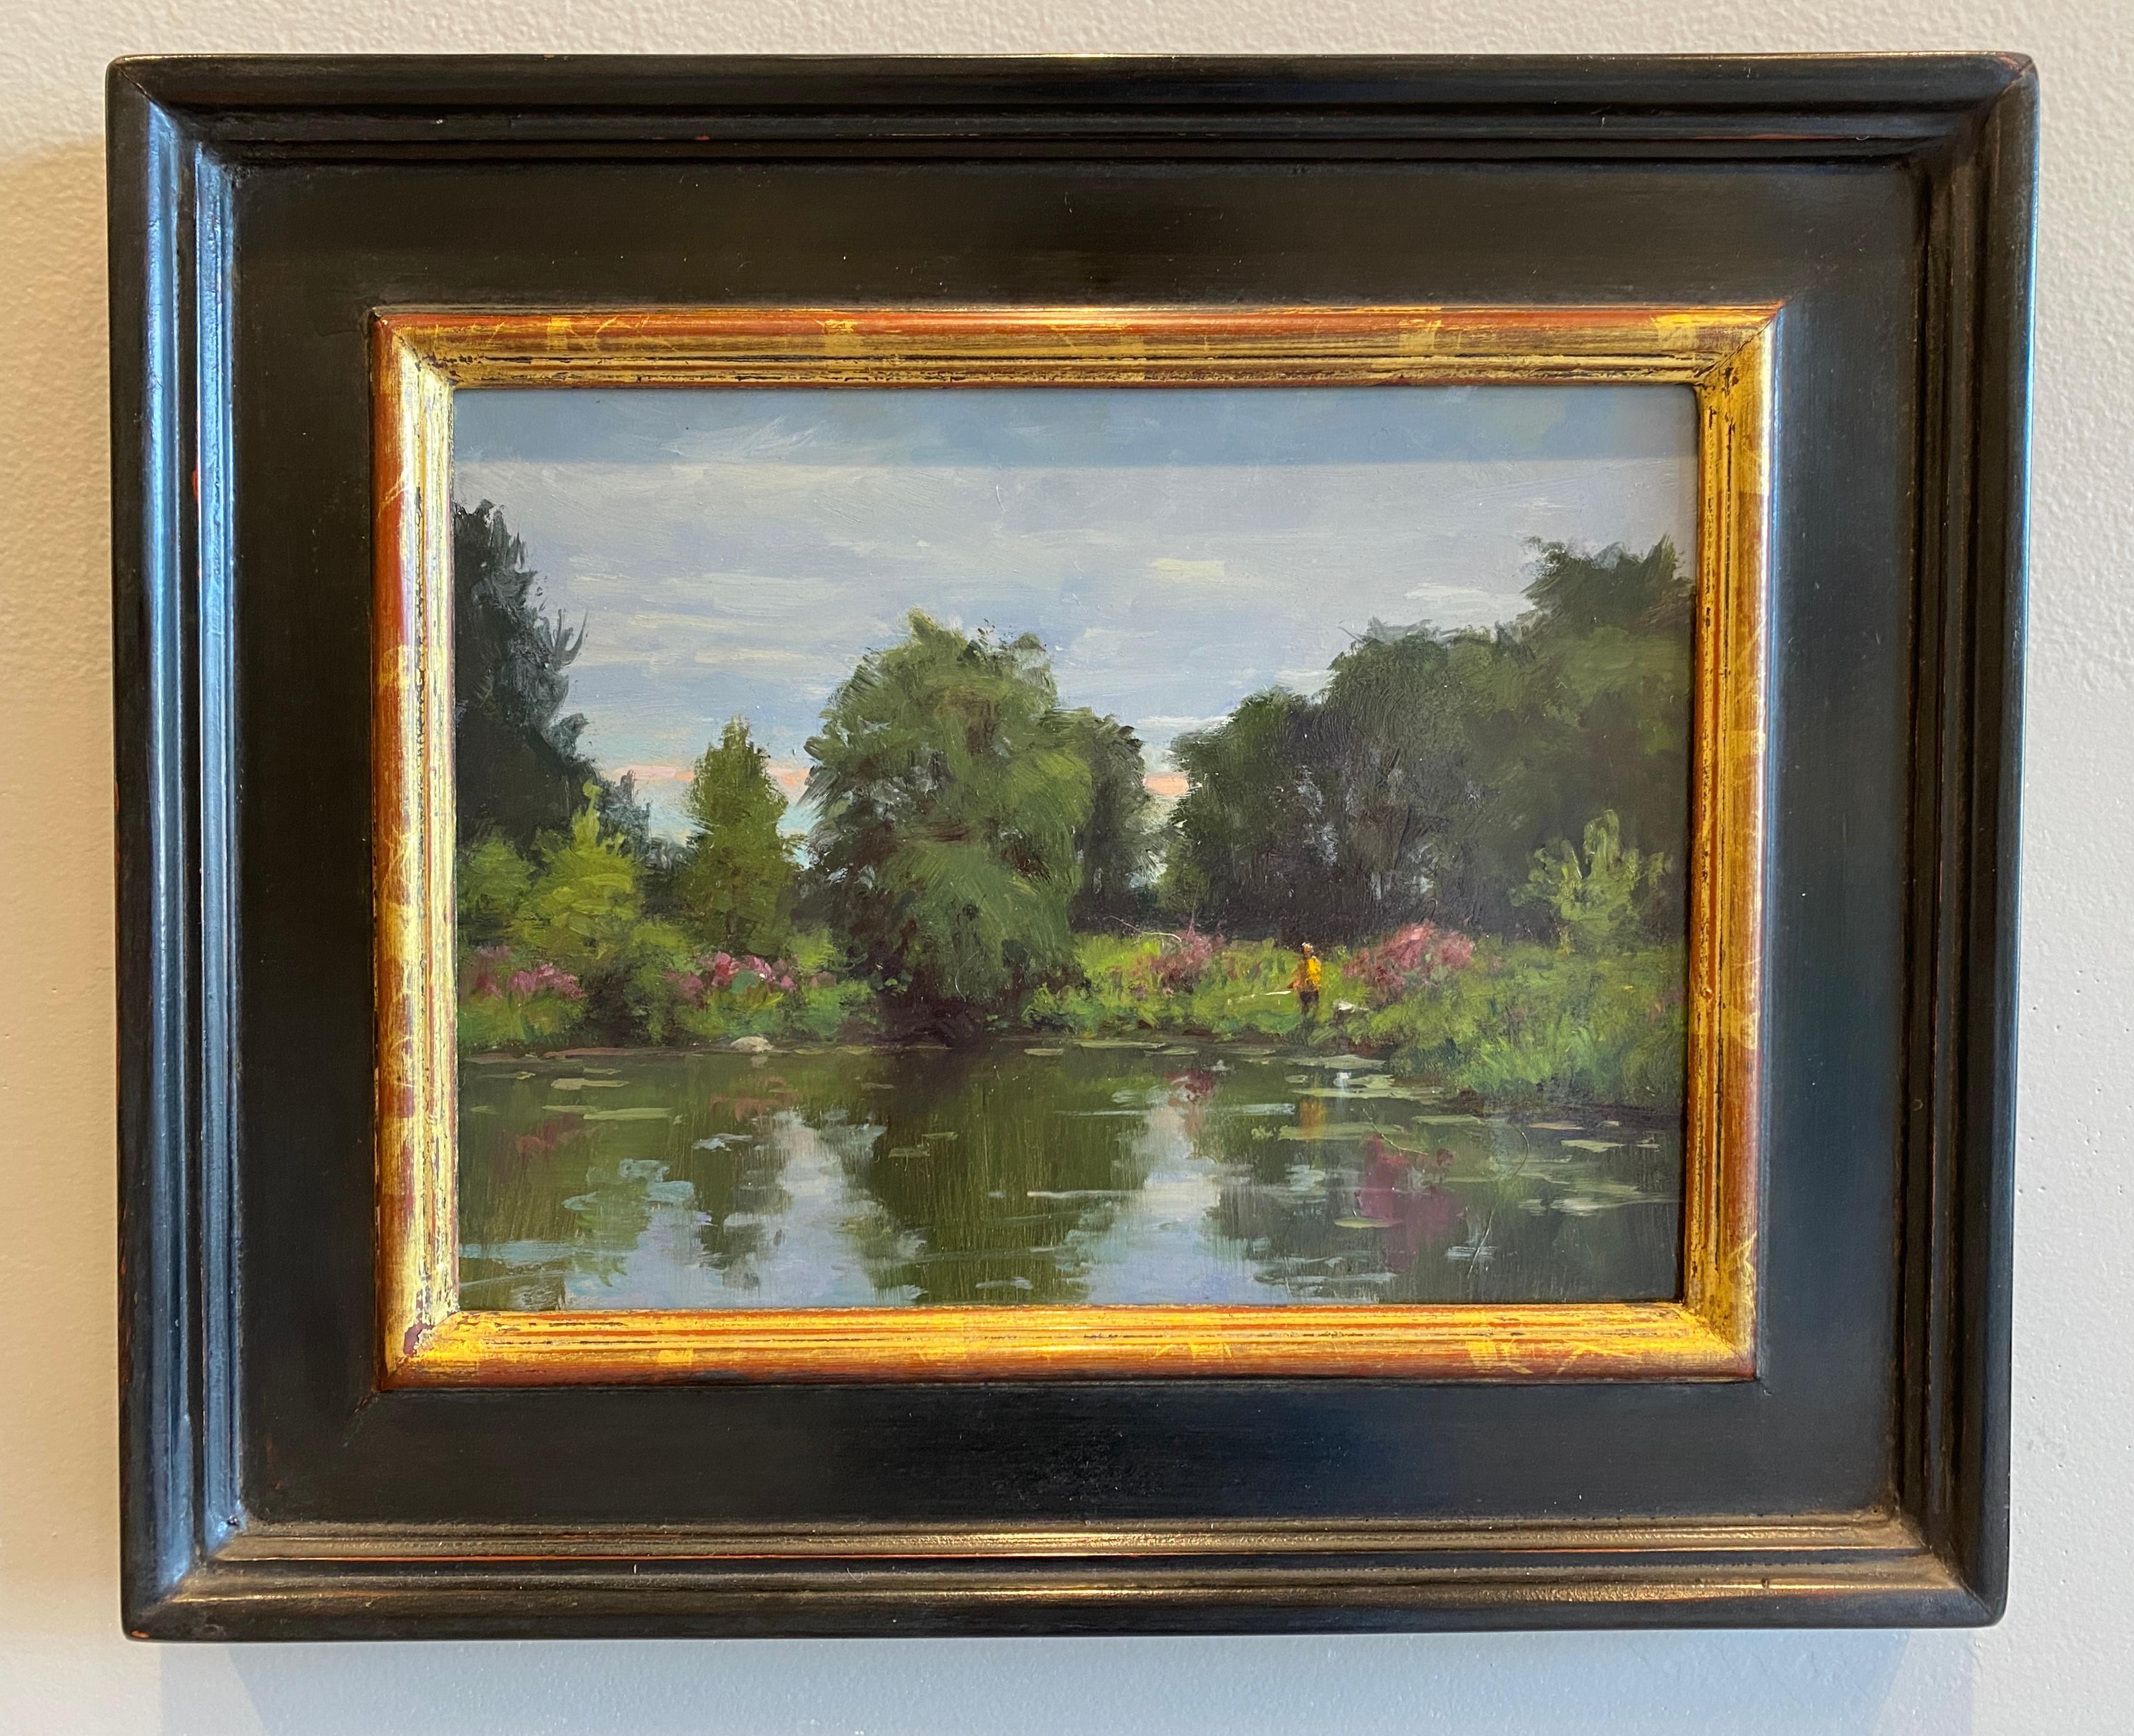 Cloudy Day by the Pond - Painting by Carl Bretzke